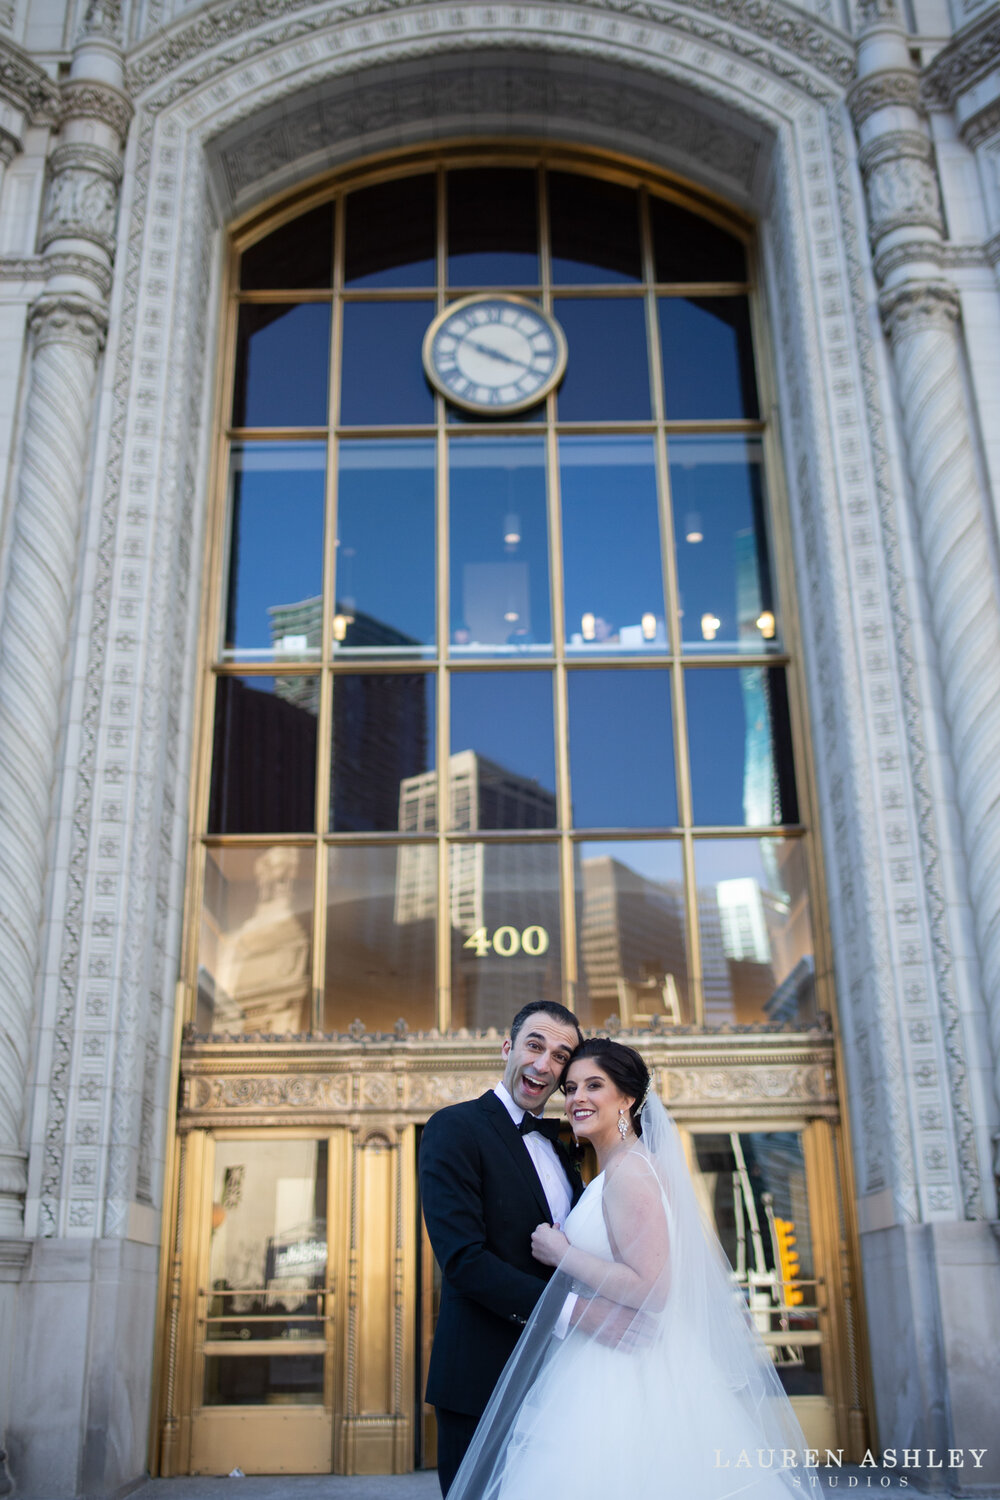 intercontinental-chicago-high-end-michigan-ave-magnificent-mile-wedding-chicago-wedding-photography-71.jpg